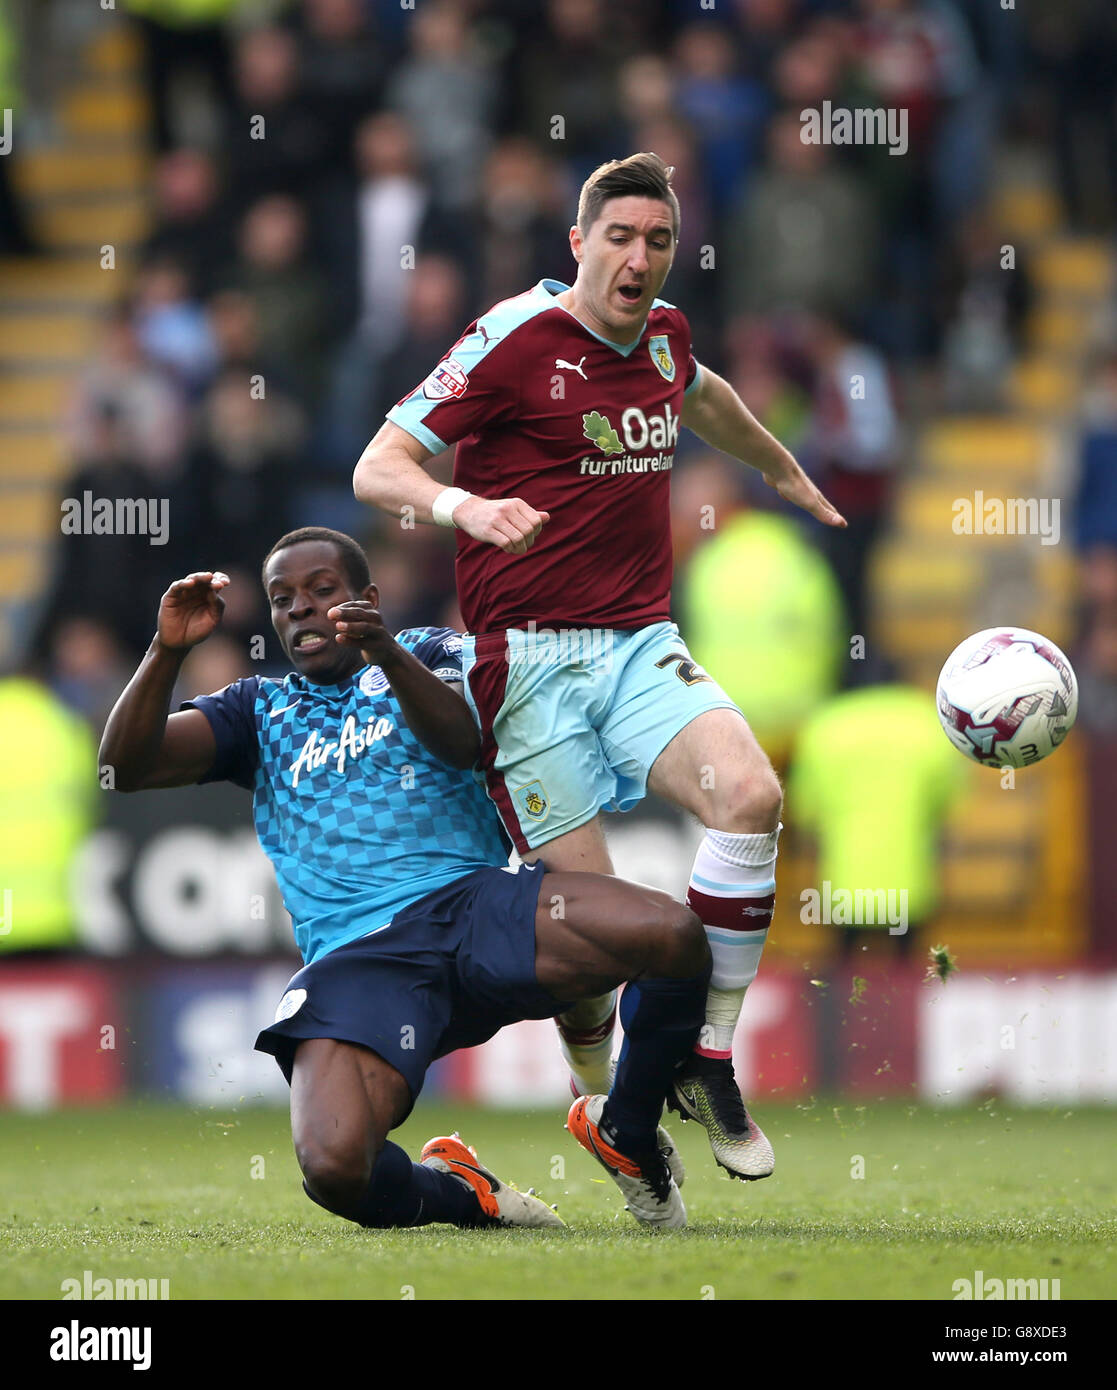 Burnley's Stephen Ward (right) and Queens Park Rangers' Nedum Onouha battle for the ball during the Sky Bet Championship match at Turf Moor, Burnley. PRESS ASSOCIATION Photo. Picture date: Monday May 2, 2016. See PA story SOCCER Burnley. Photo credit should read: Tim Goode/PA Wire. Stock Photo